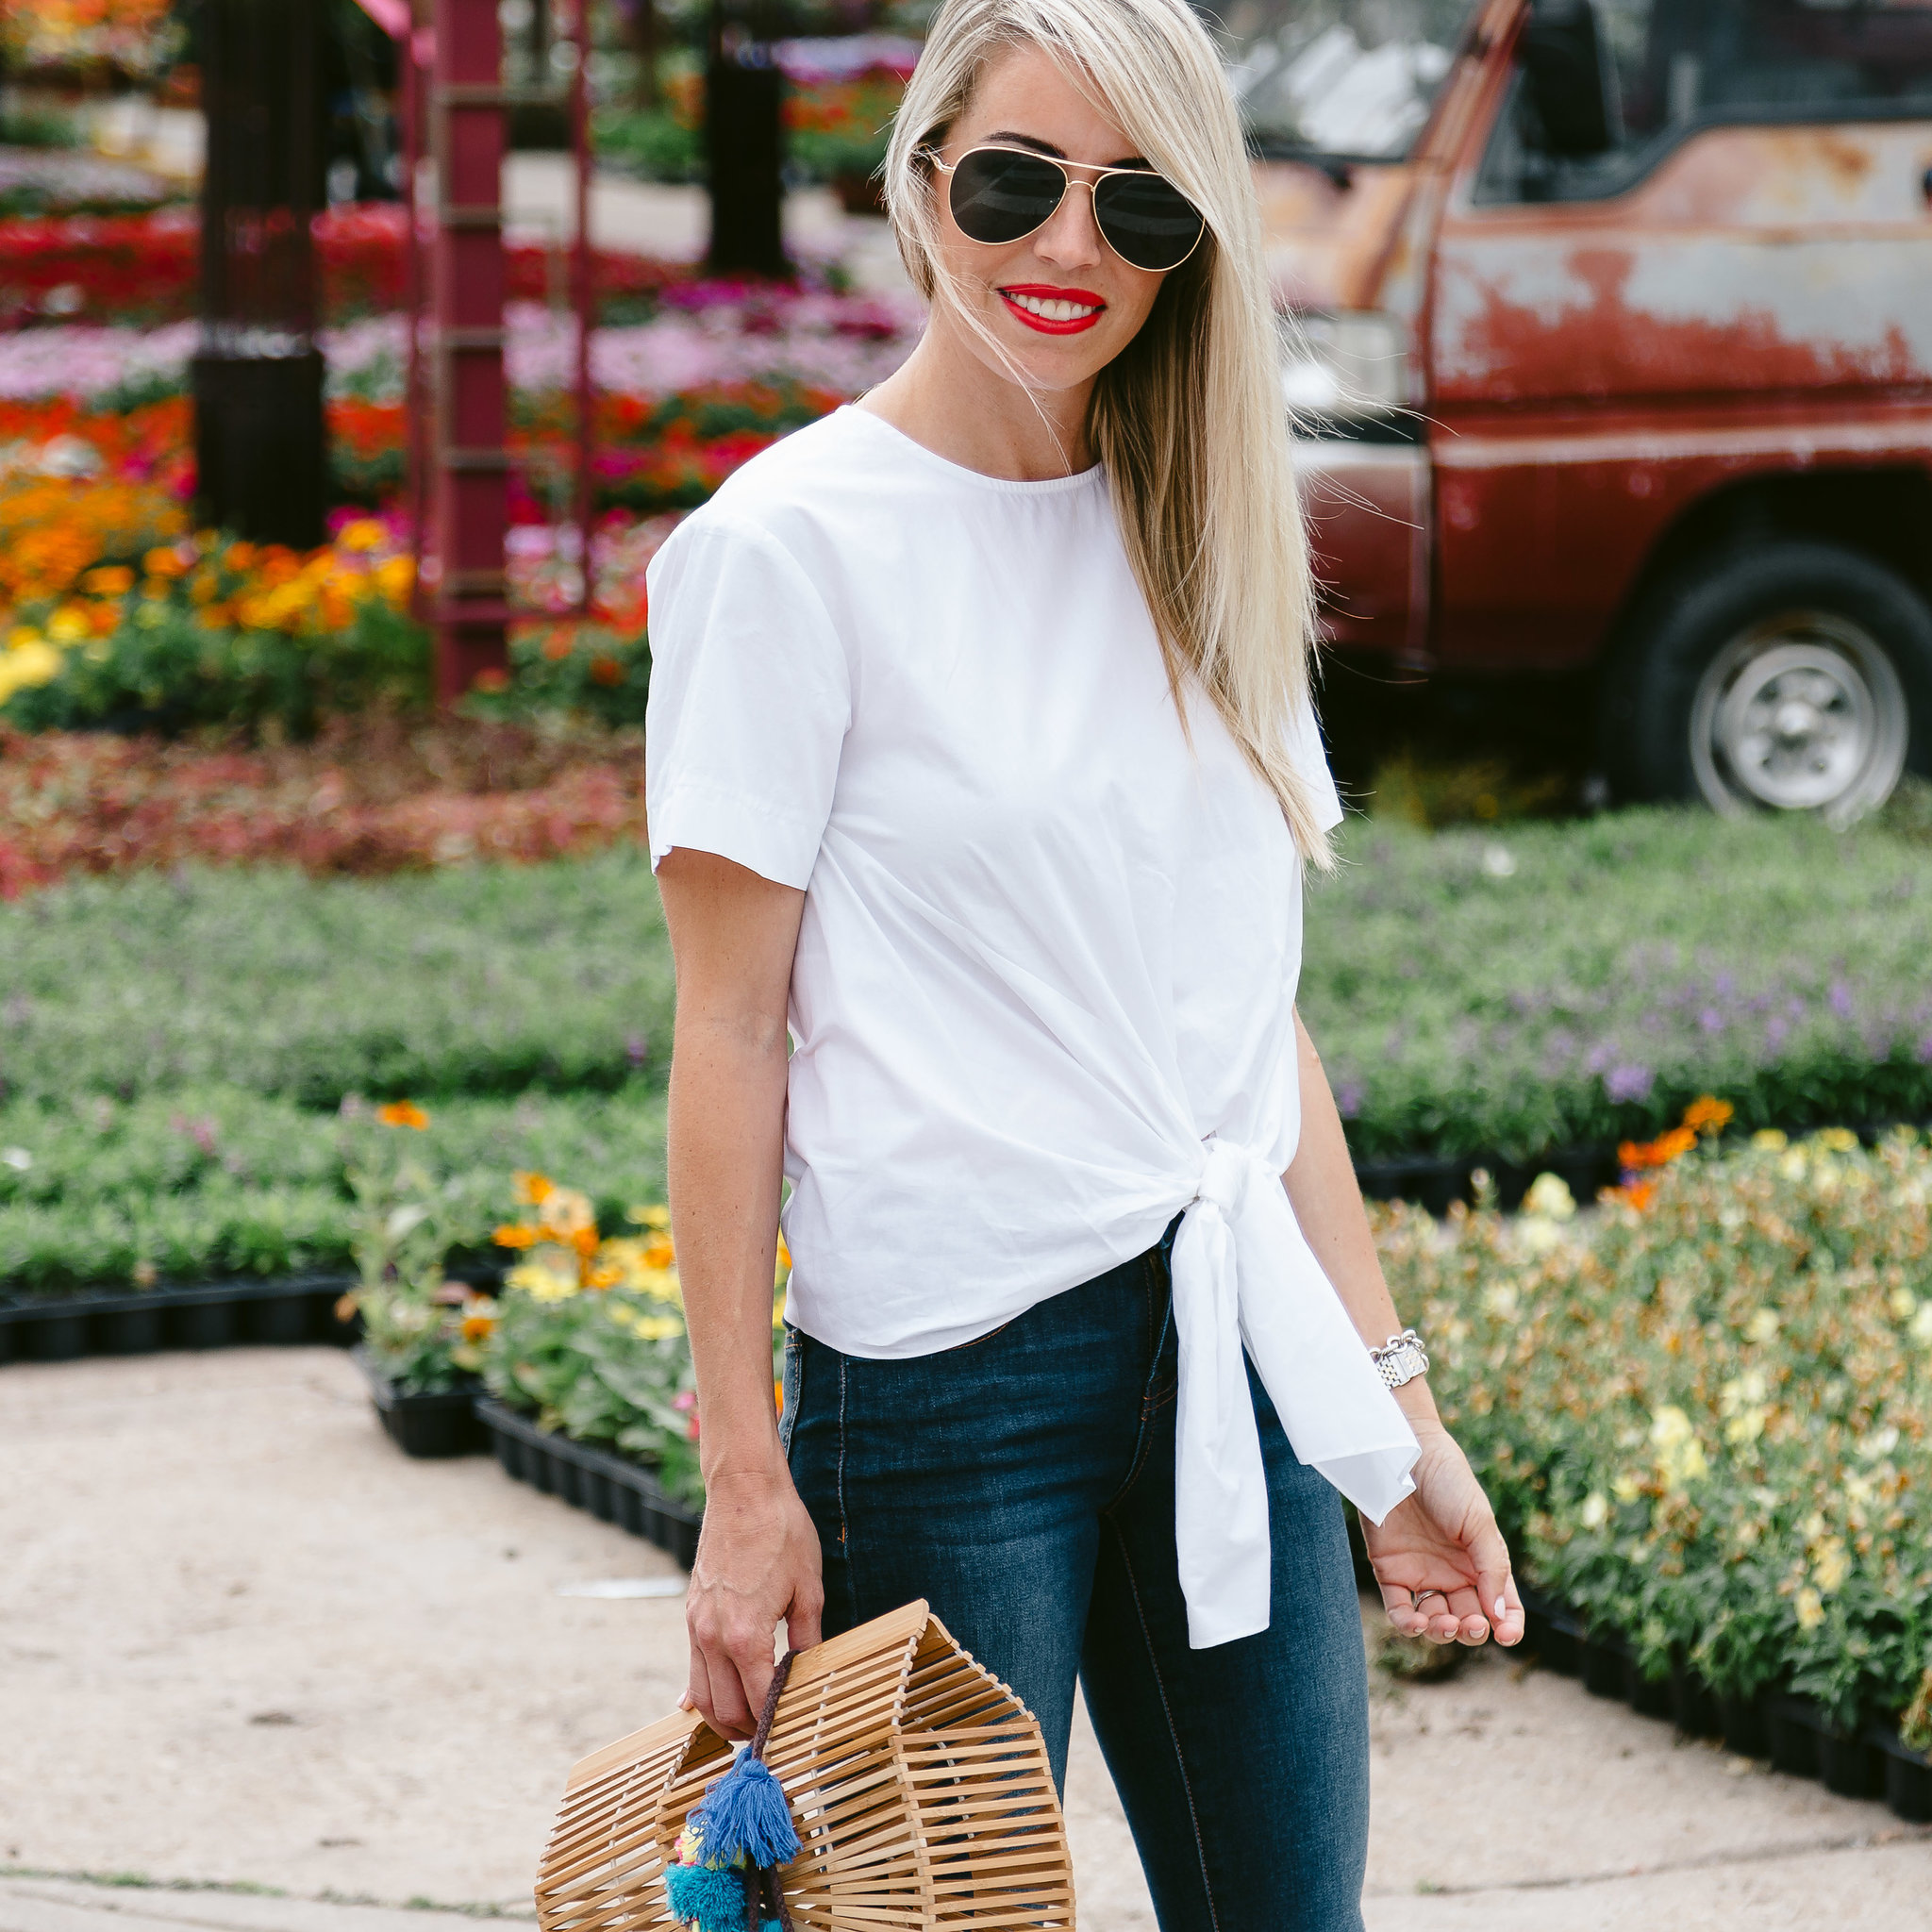 tie front white top worn with jeans and open toe sandals